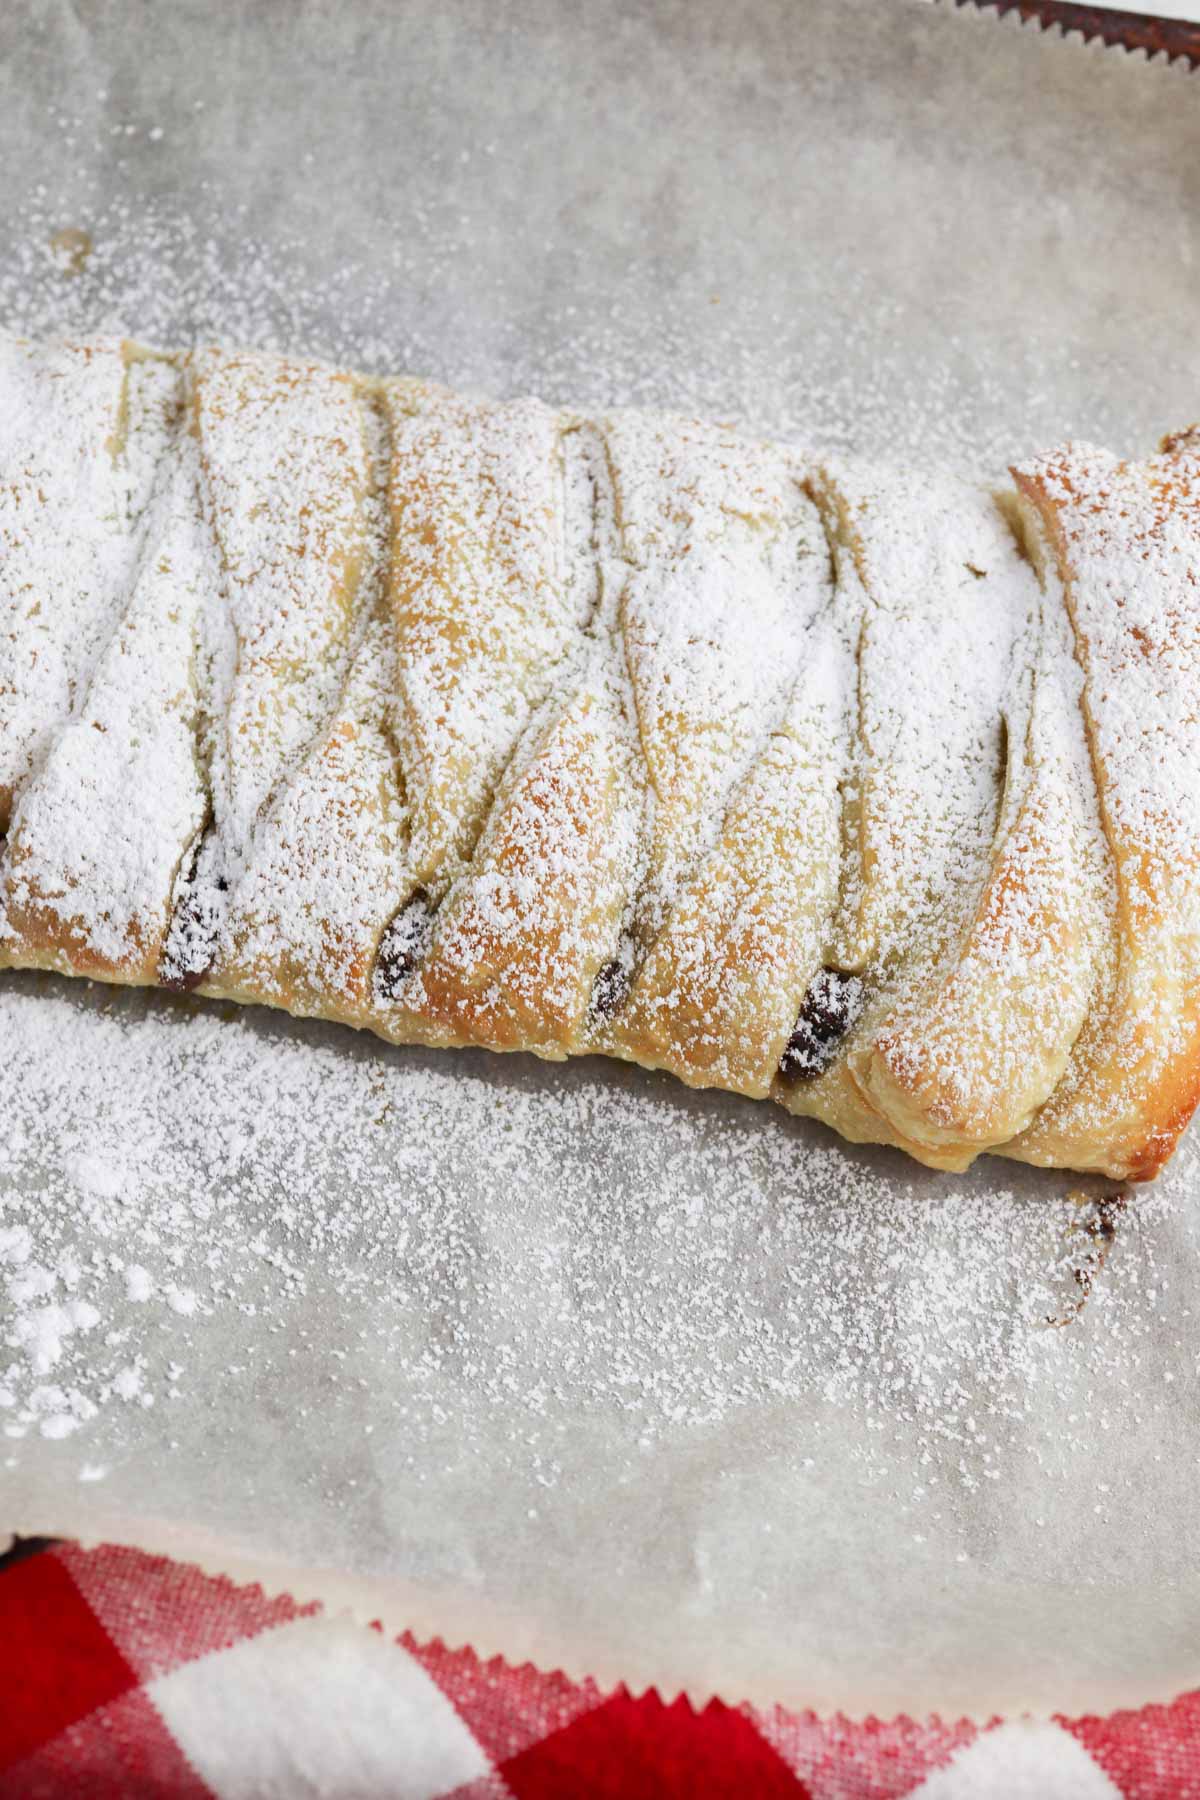 A pastry with powdered sugar on top.